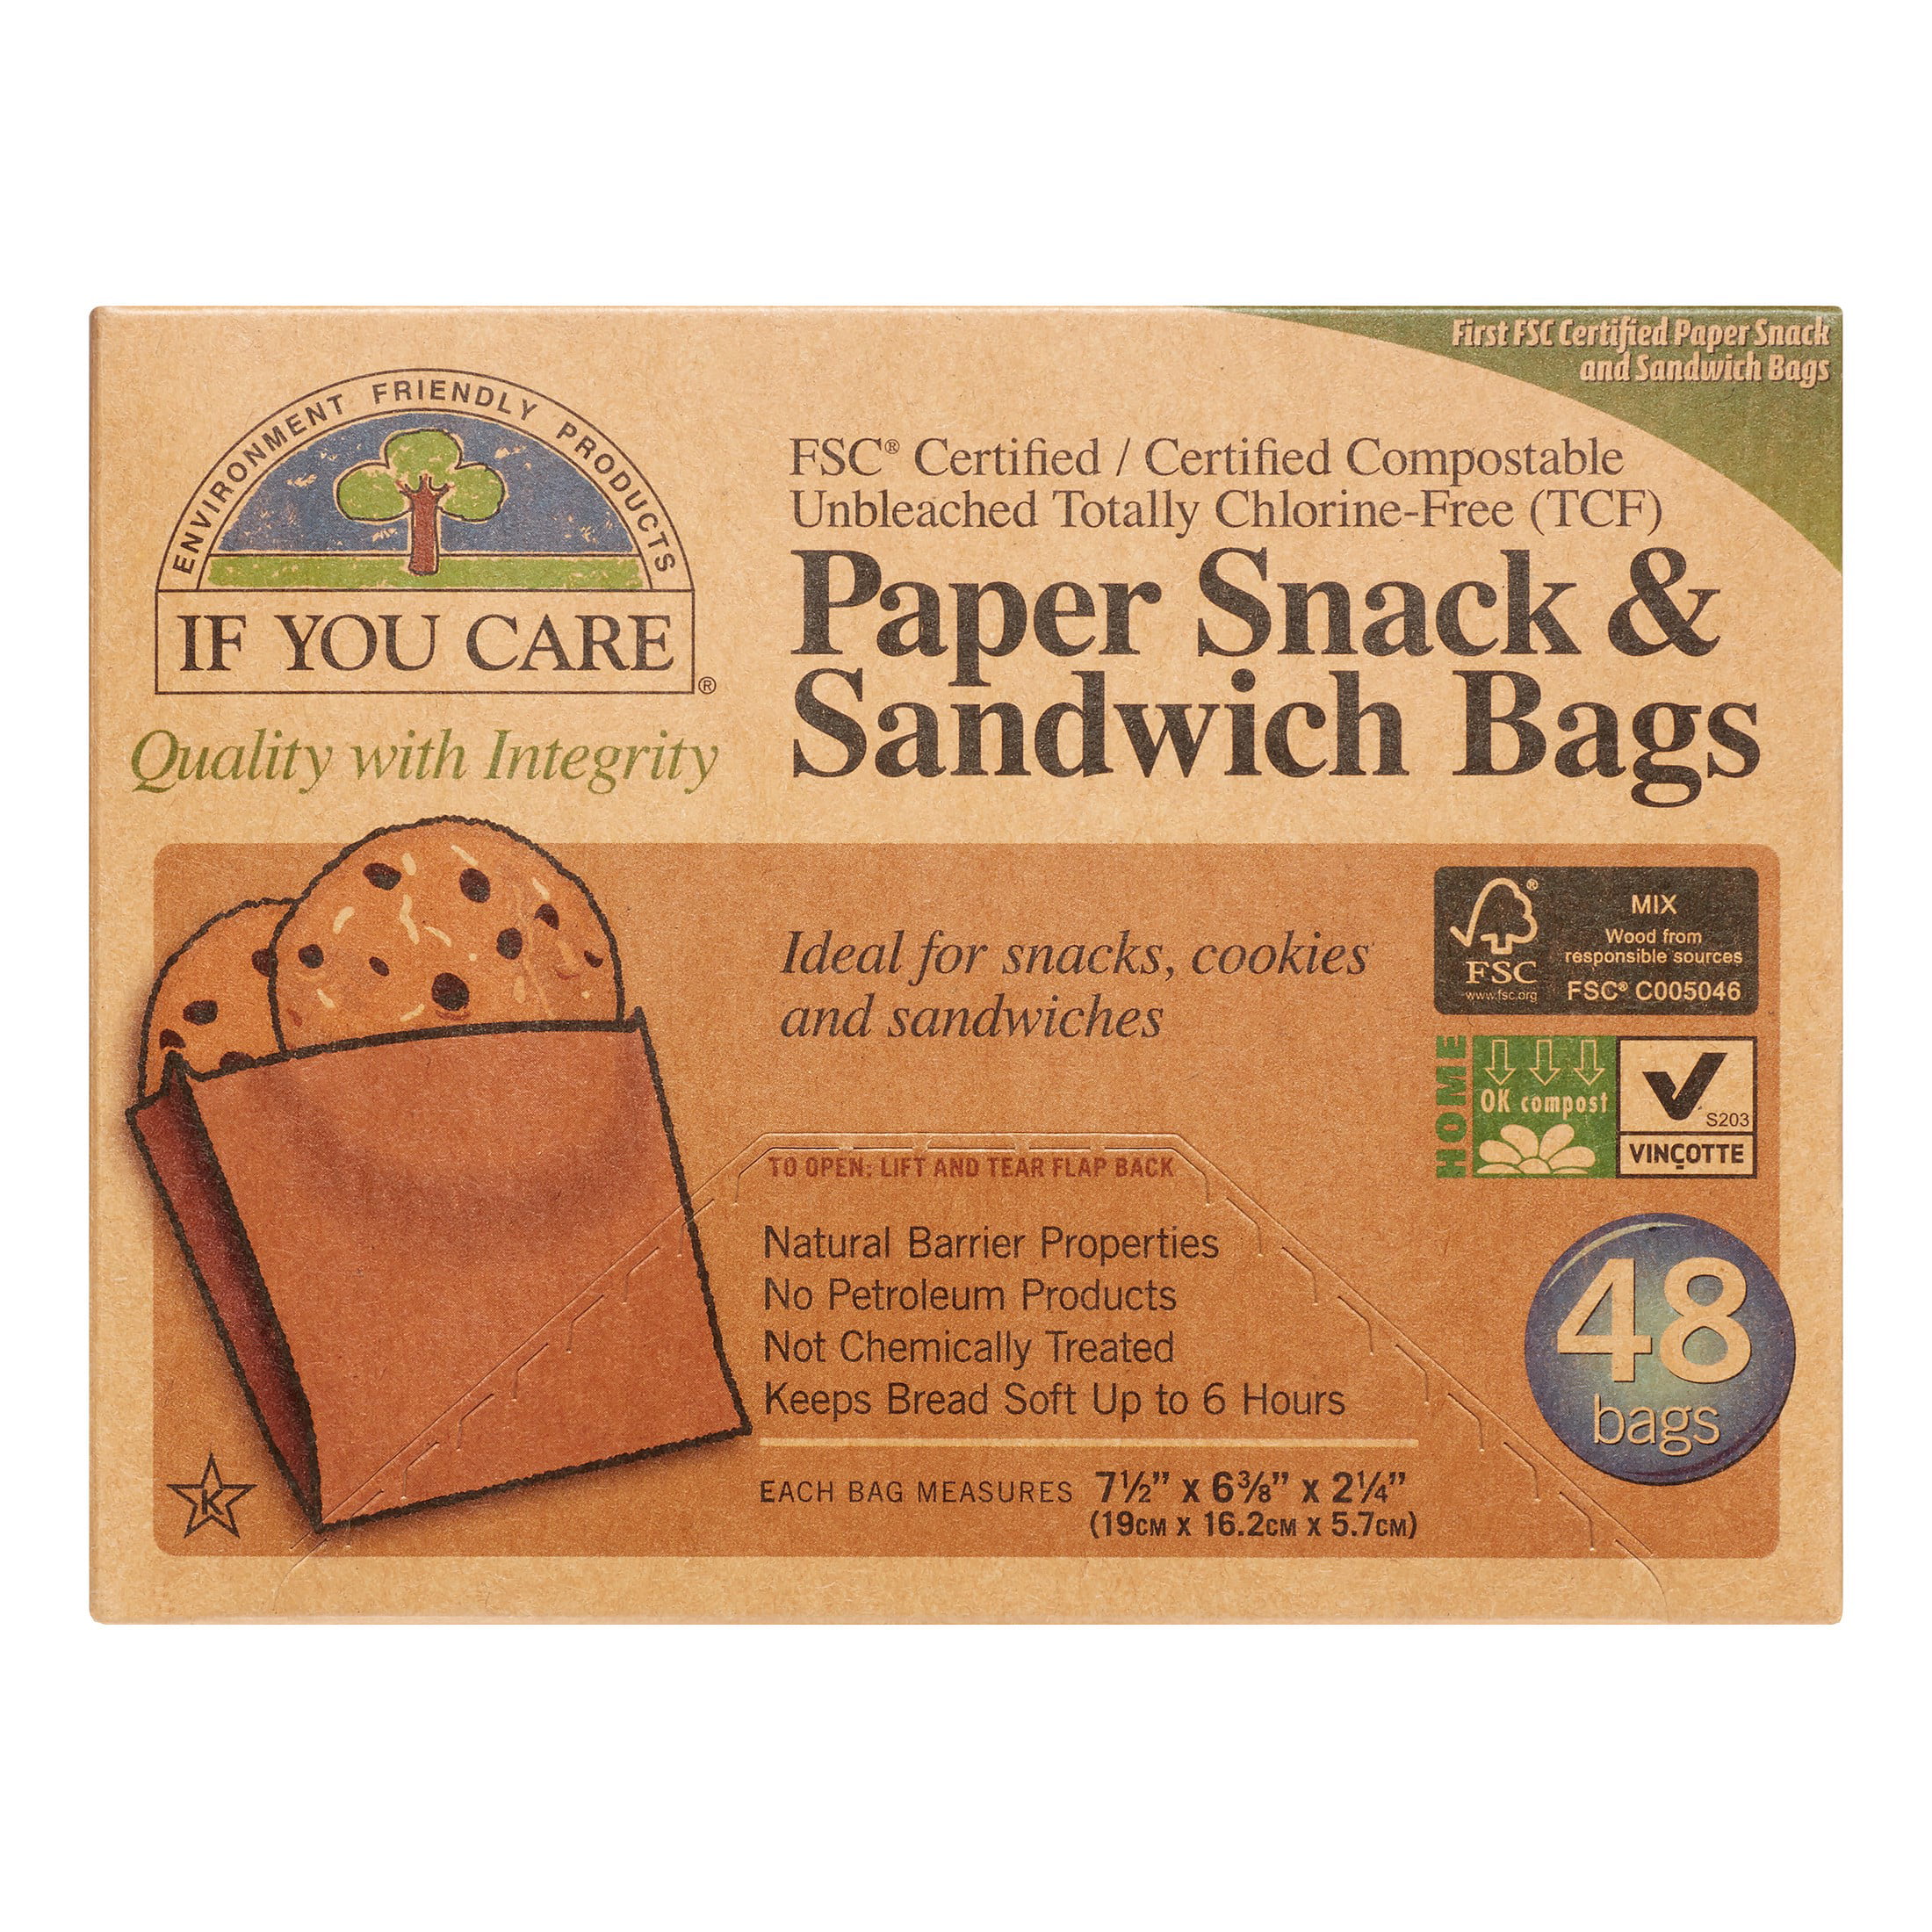 1 PACK OF 6 BAGS MEDIUM IF YOU CARE NON-STICK PARCHMENT ROASTING BAGS 